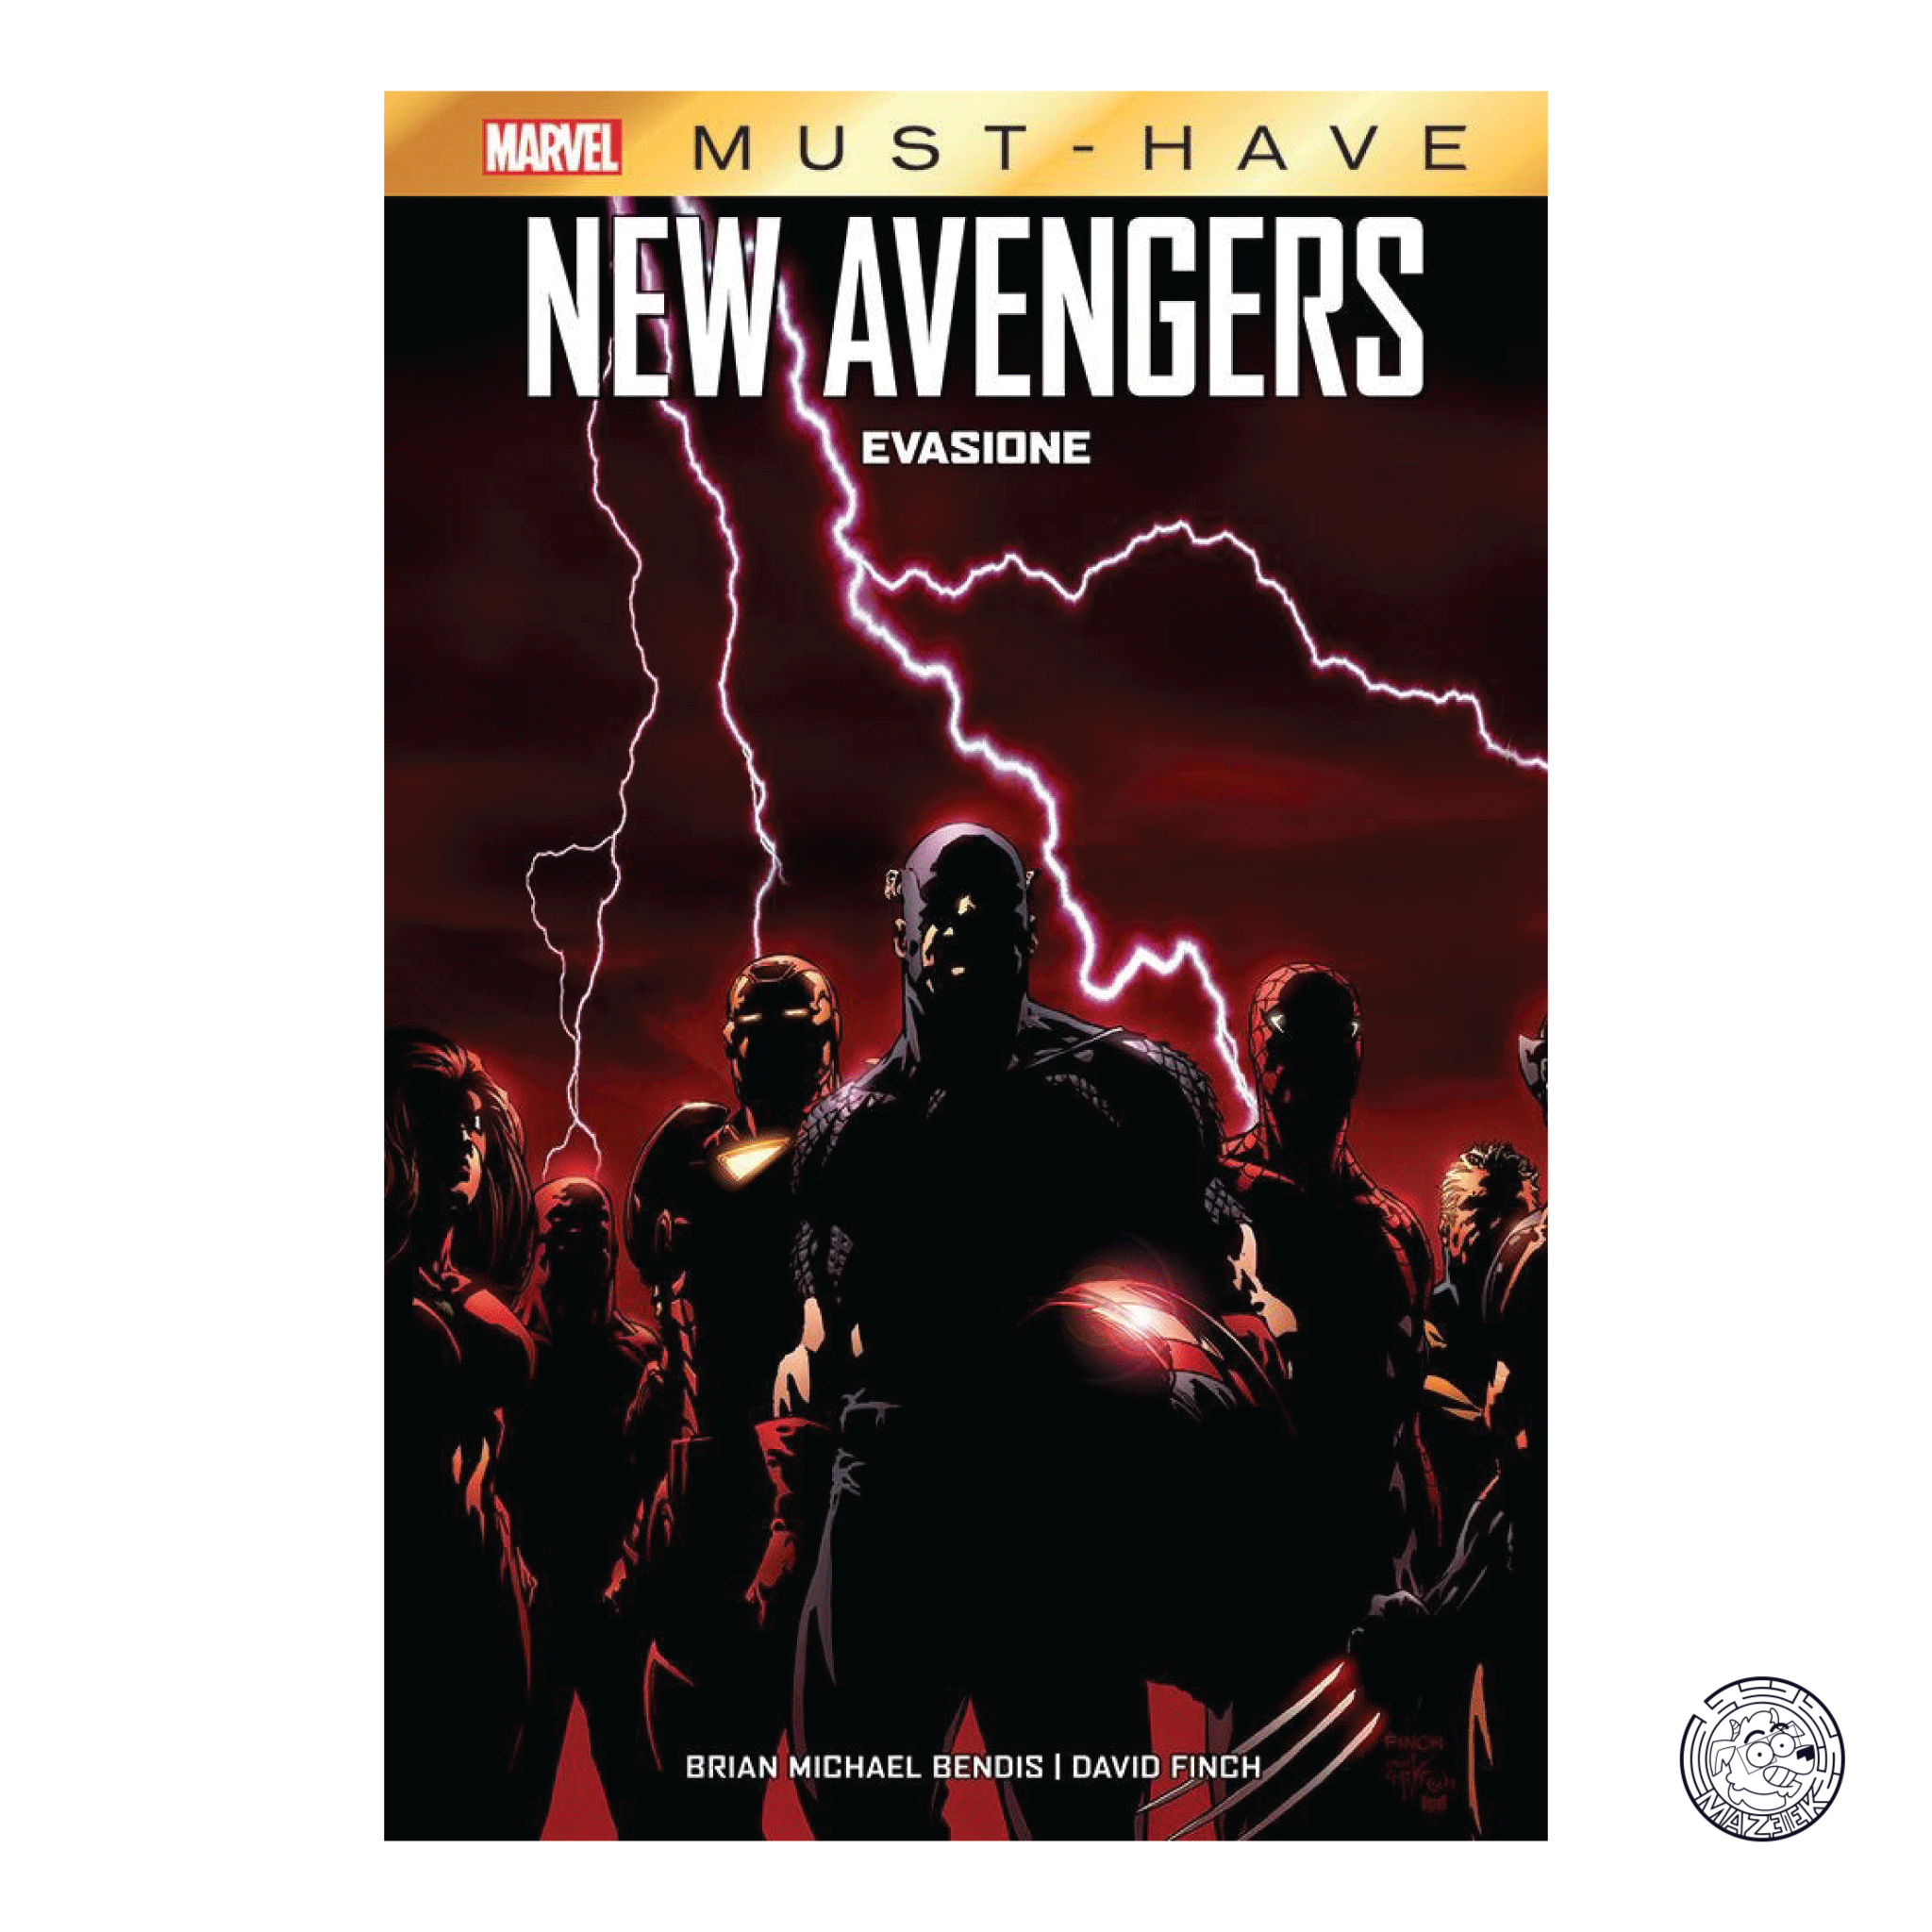 Marvel Must Have - New Avengers Evasione